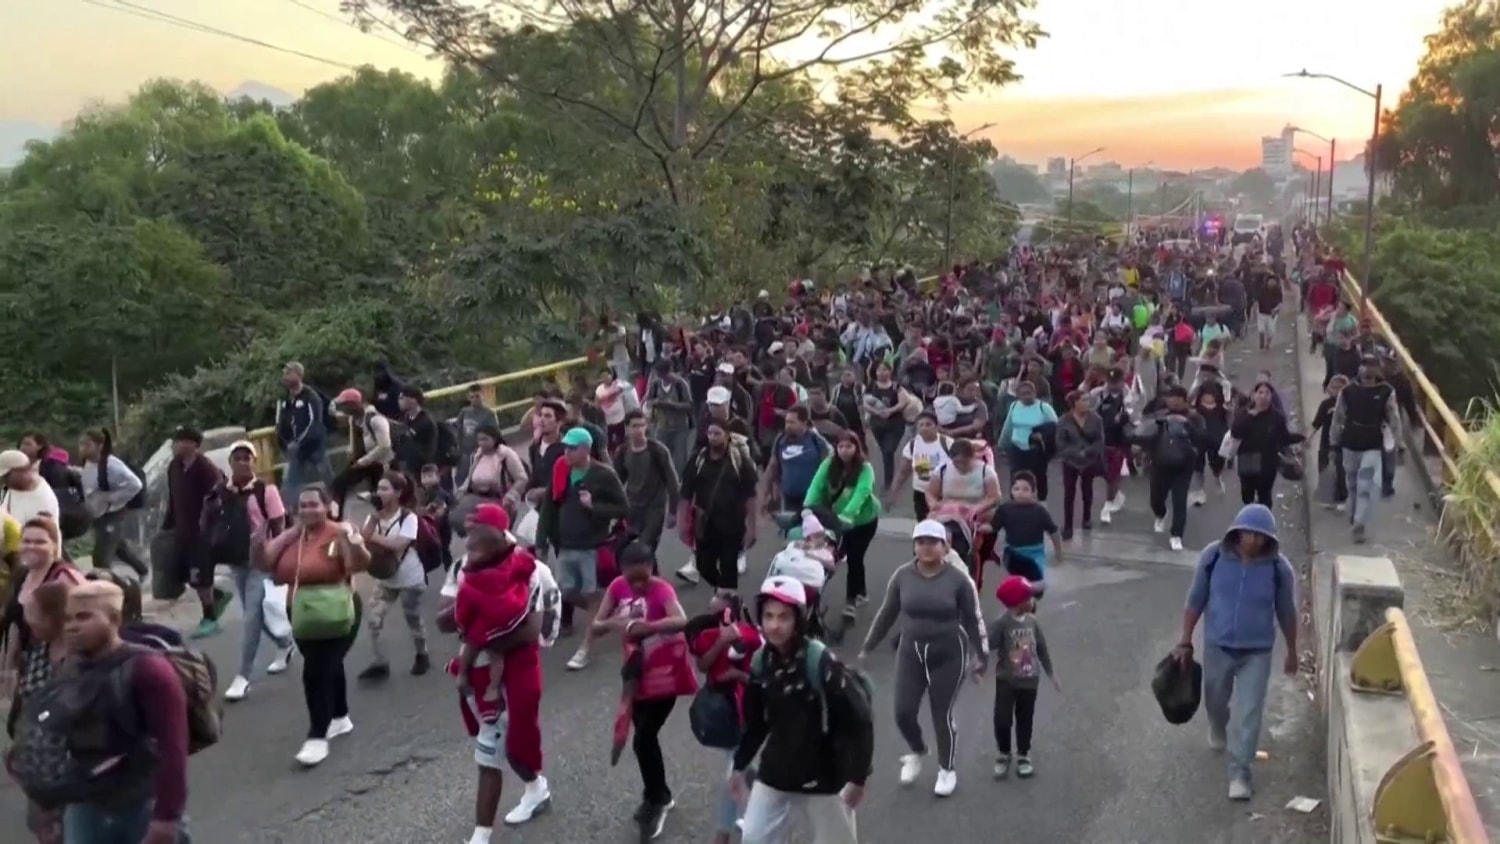 Largest migrant caravan in more than a year headed to US